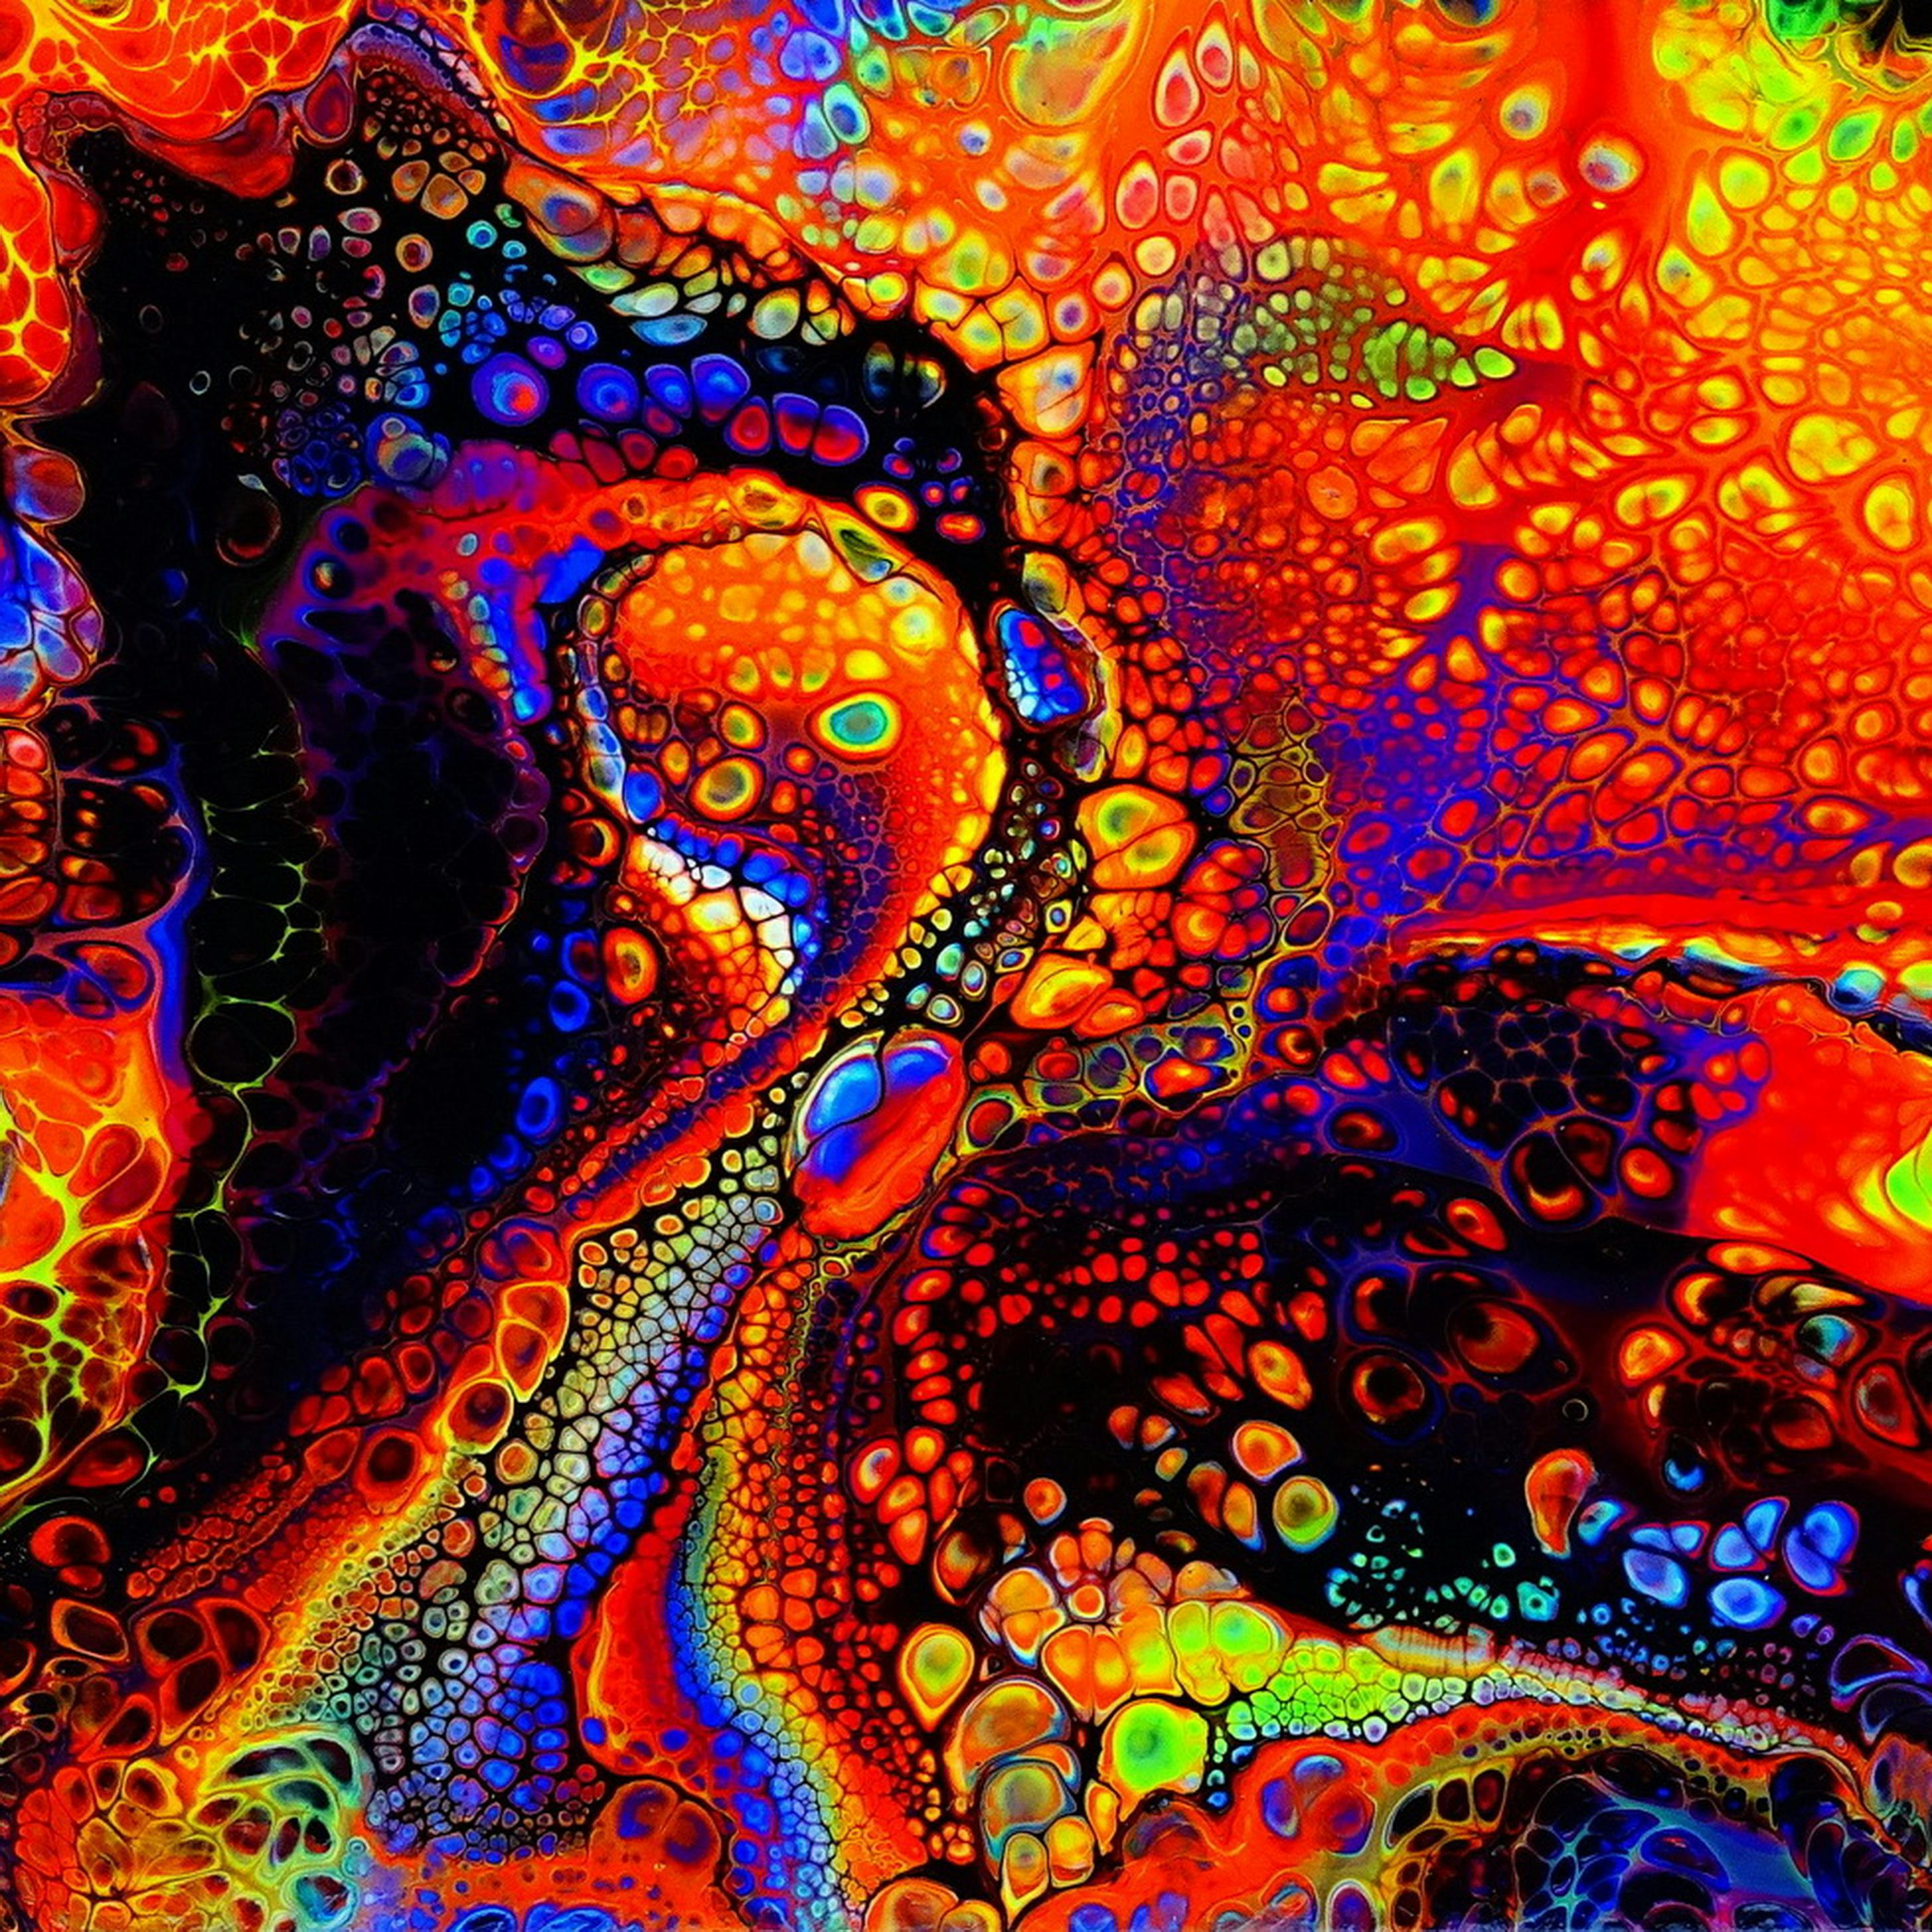 4K Trippy Art Wallpaper Psychedelic:Amazon.co.uk:Appstore for Android